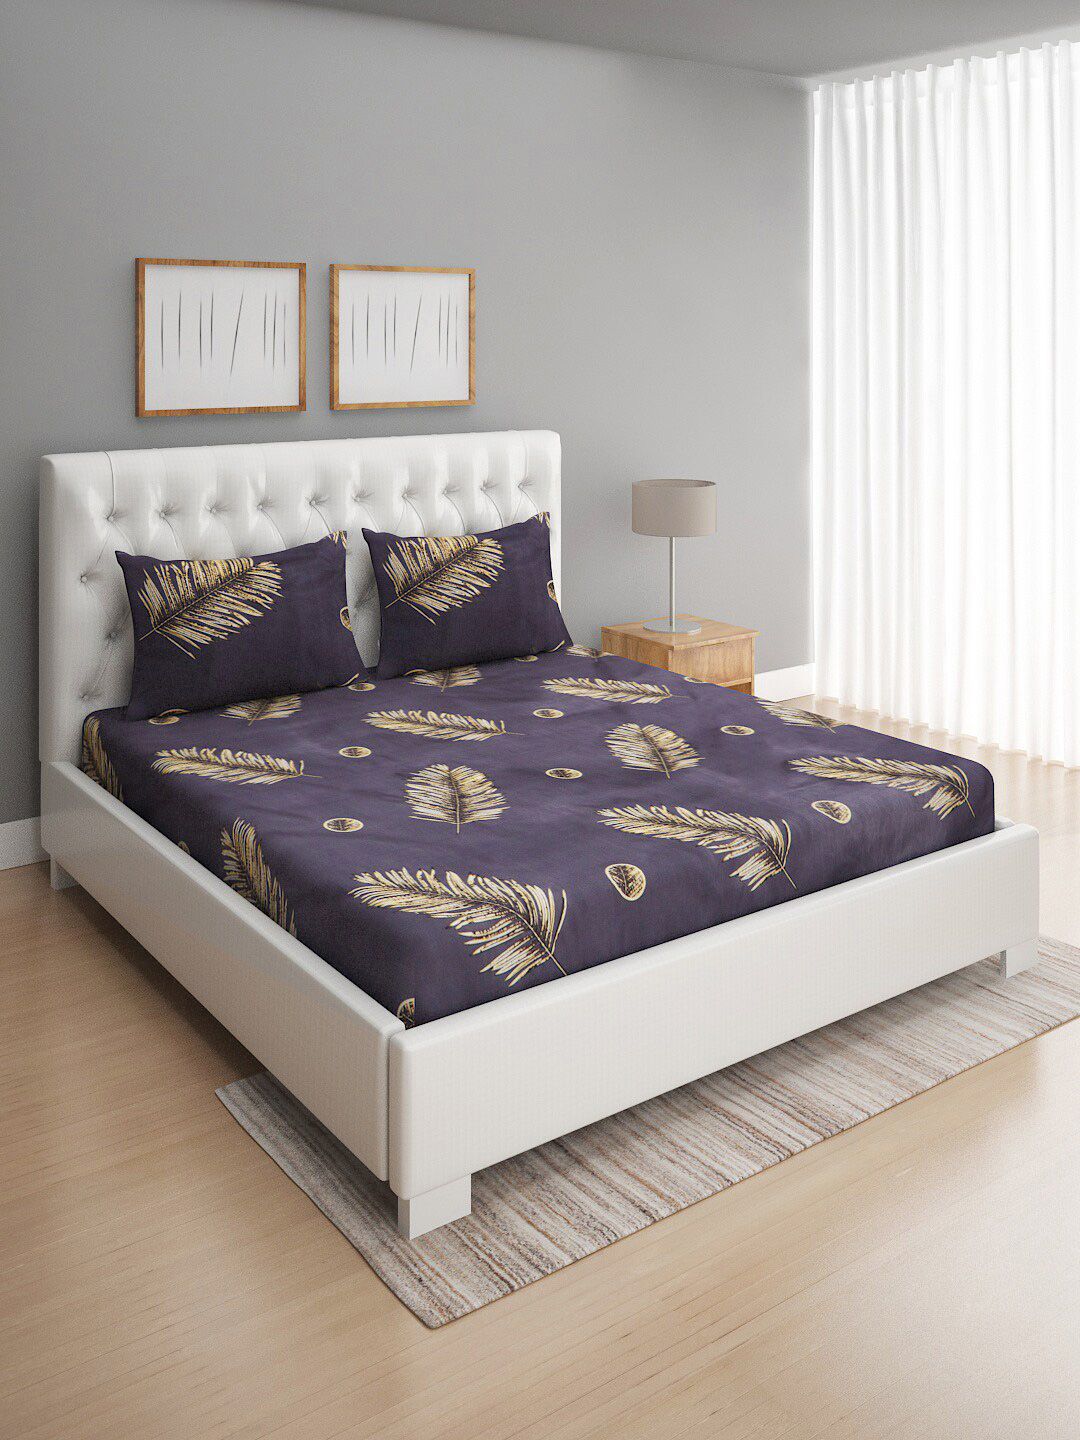 ROMEE Violet & Brown Floral 144 TC Cotton Queen Bedsheet with 2 Pillow Covers Price in India